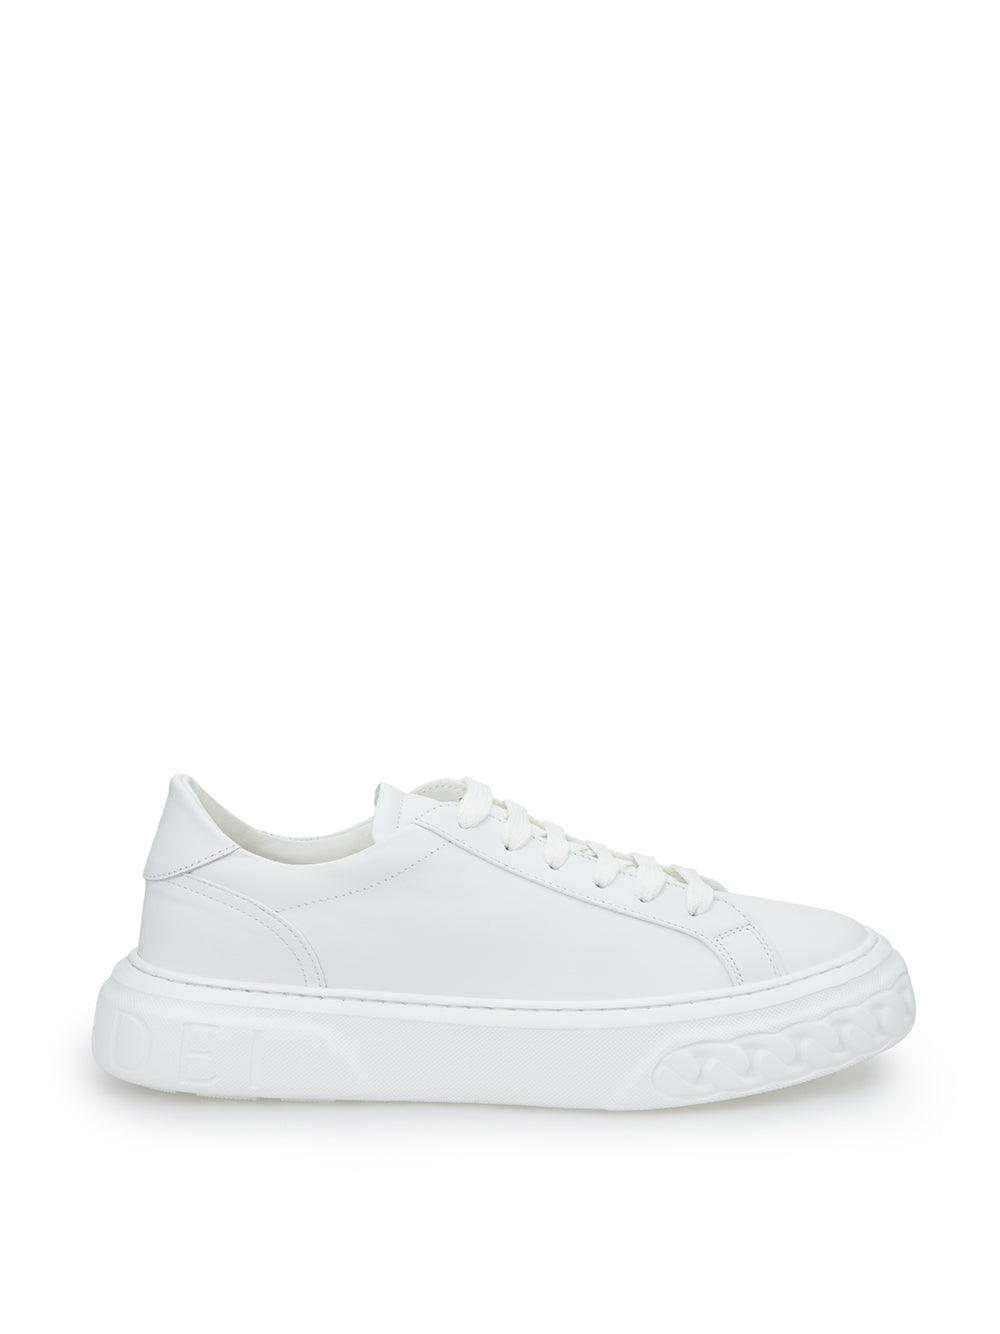 Casadei White Nappa Leather Off-Road Sneakers - Ellie Belle